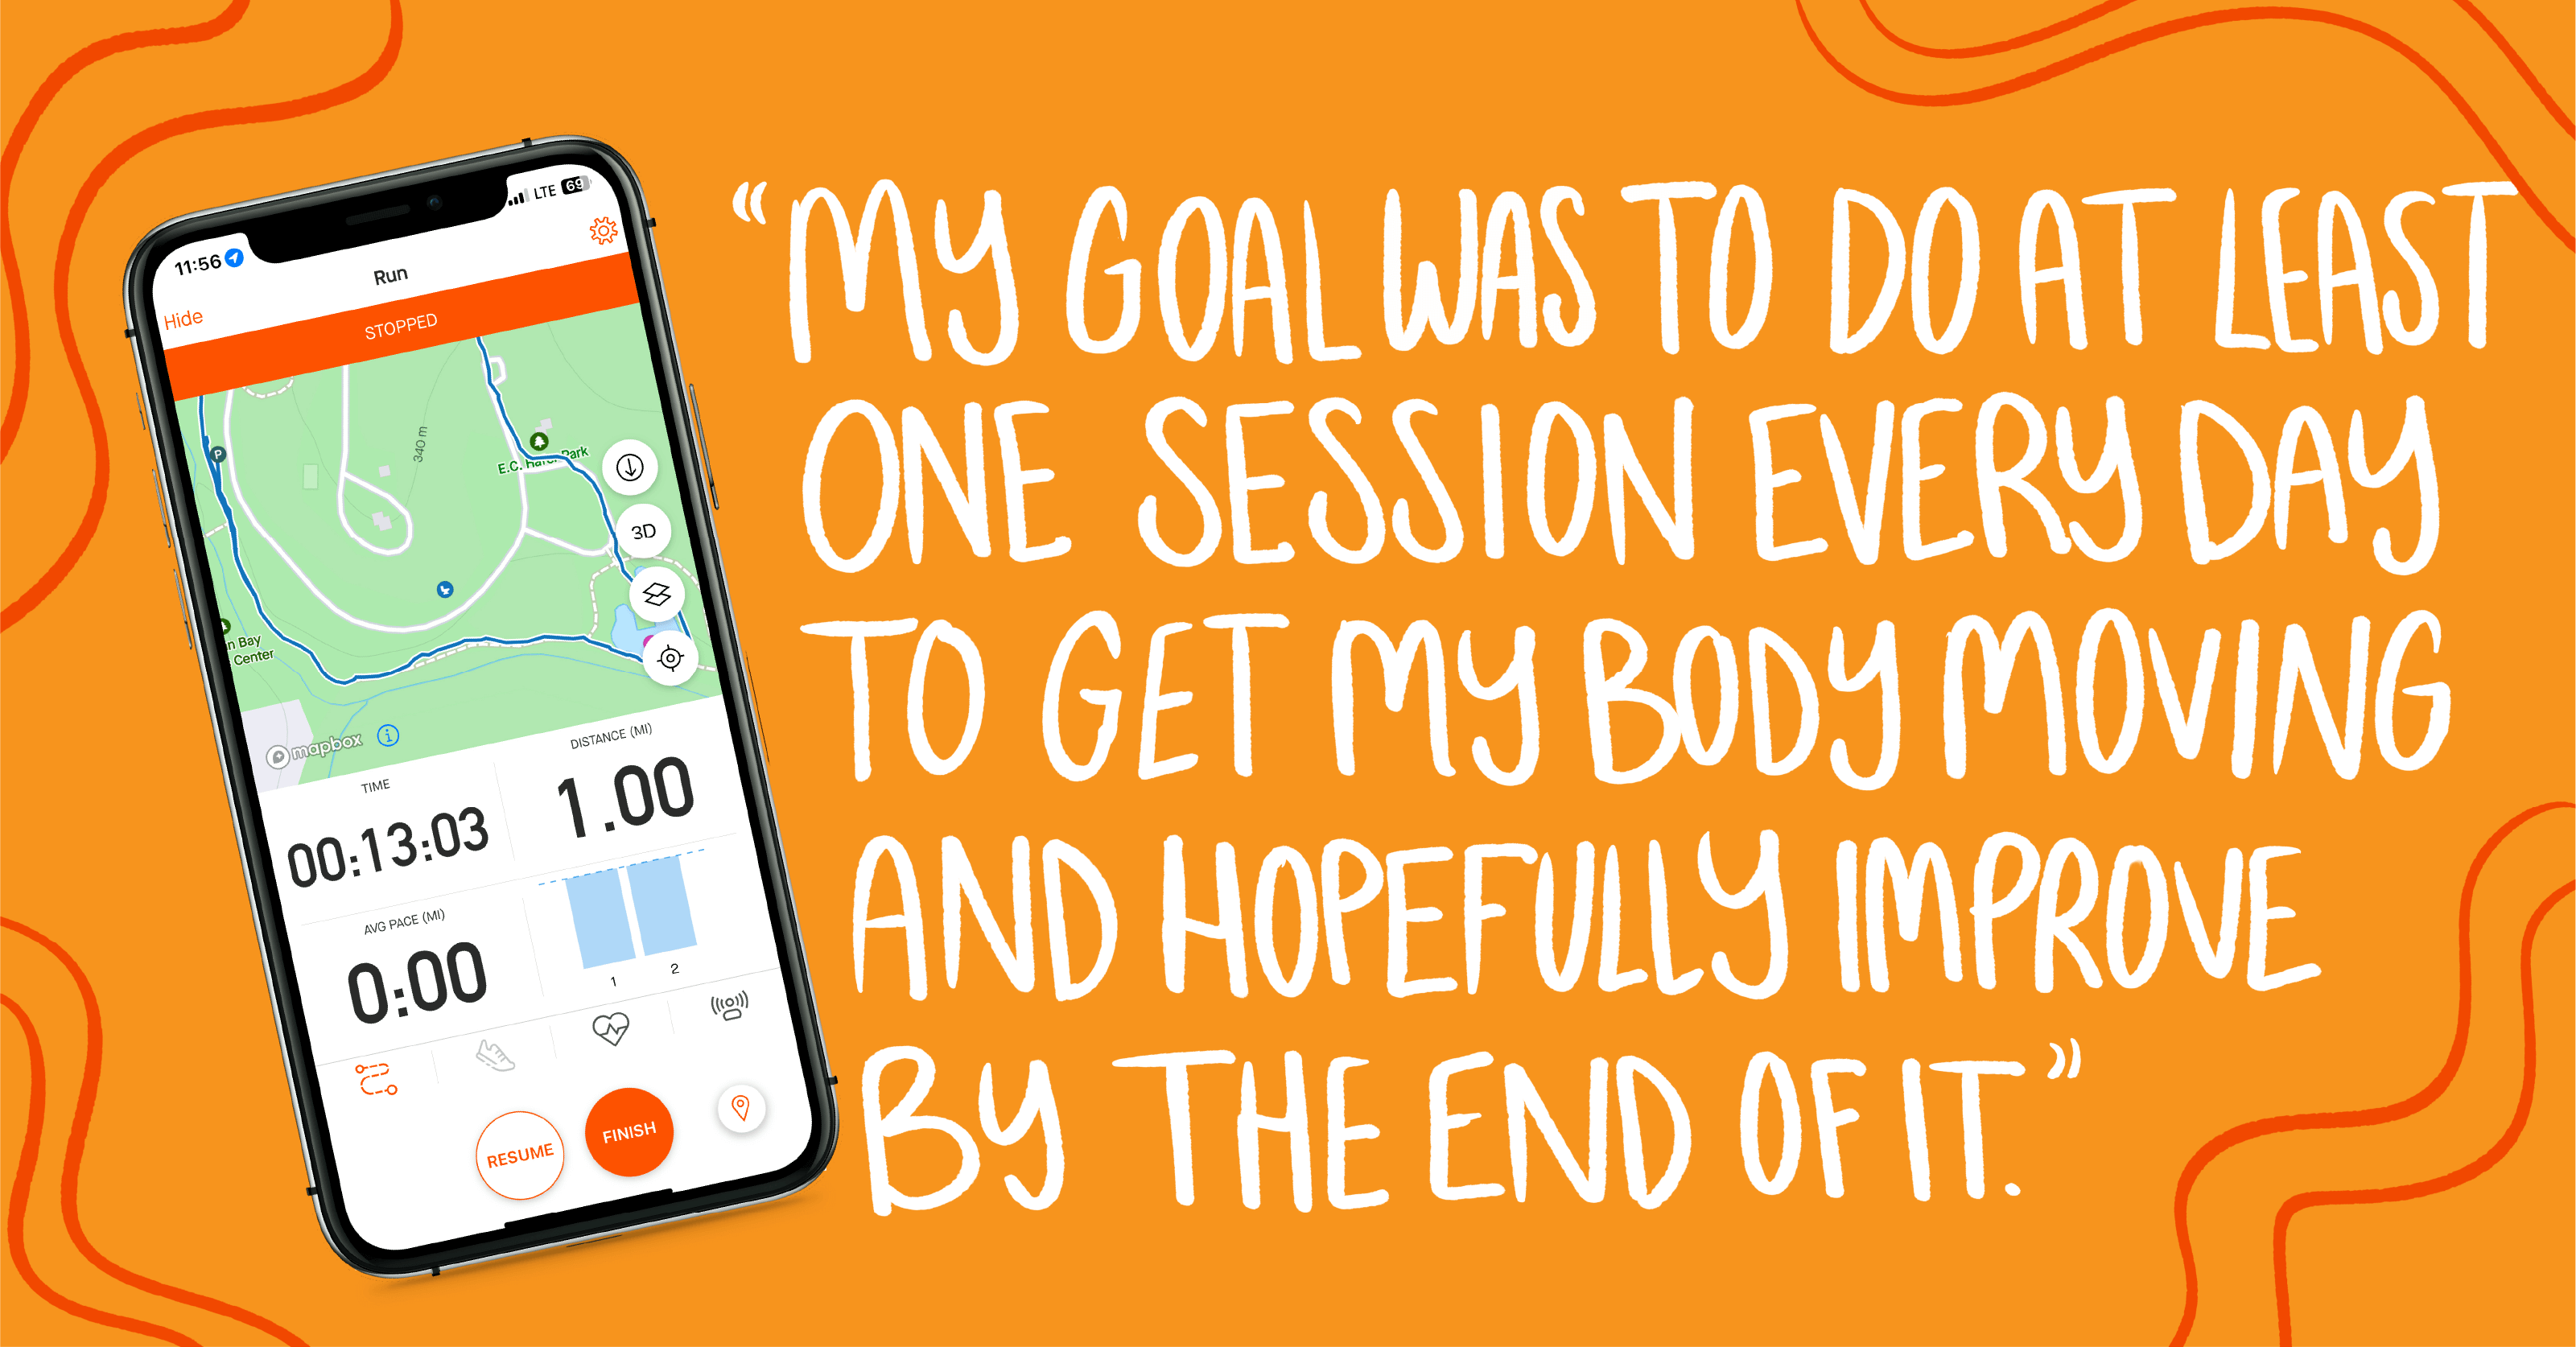 My goal was to do at least one session every day to get my body moving and hopefully improve by the end of it